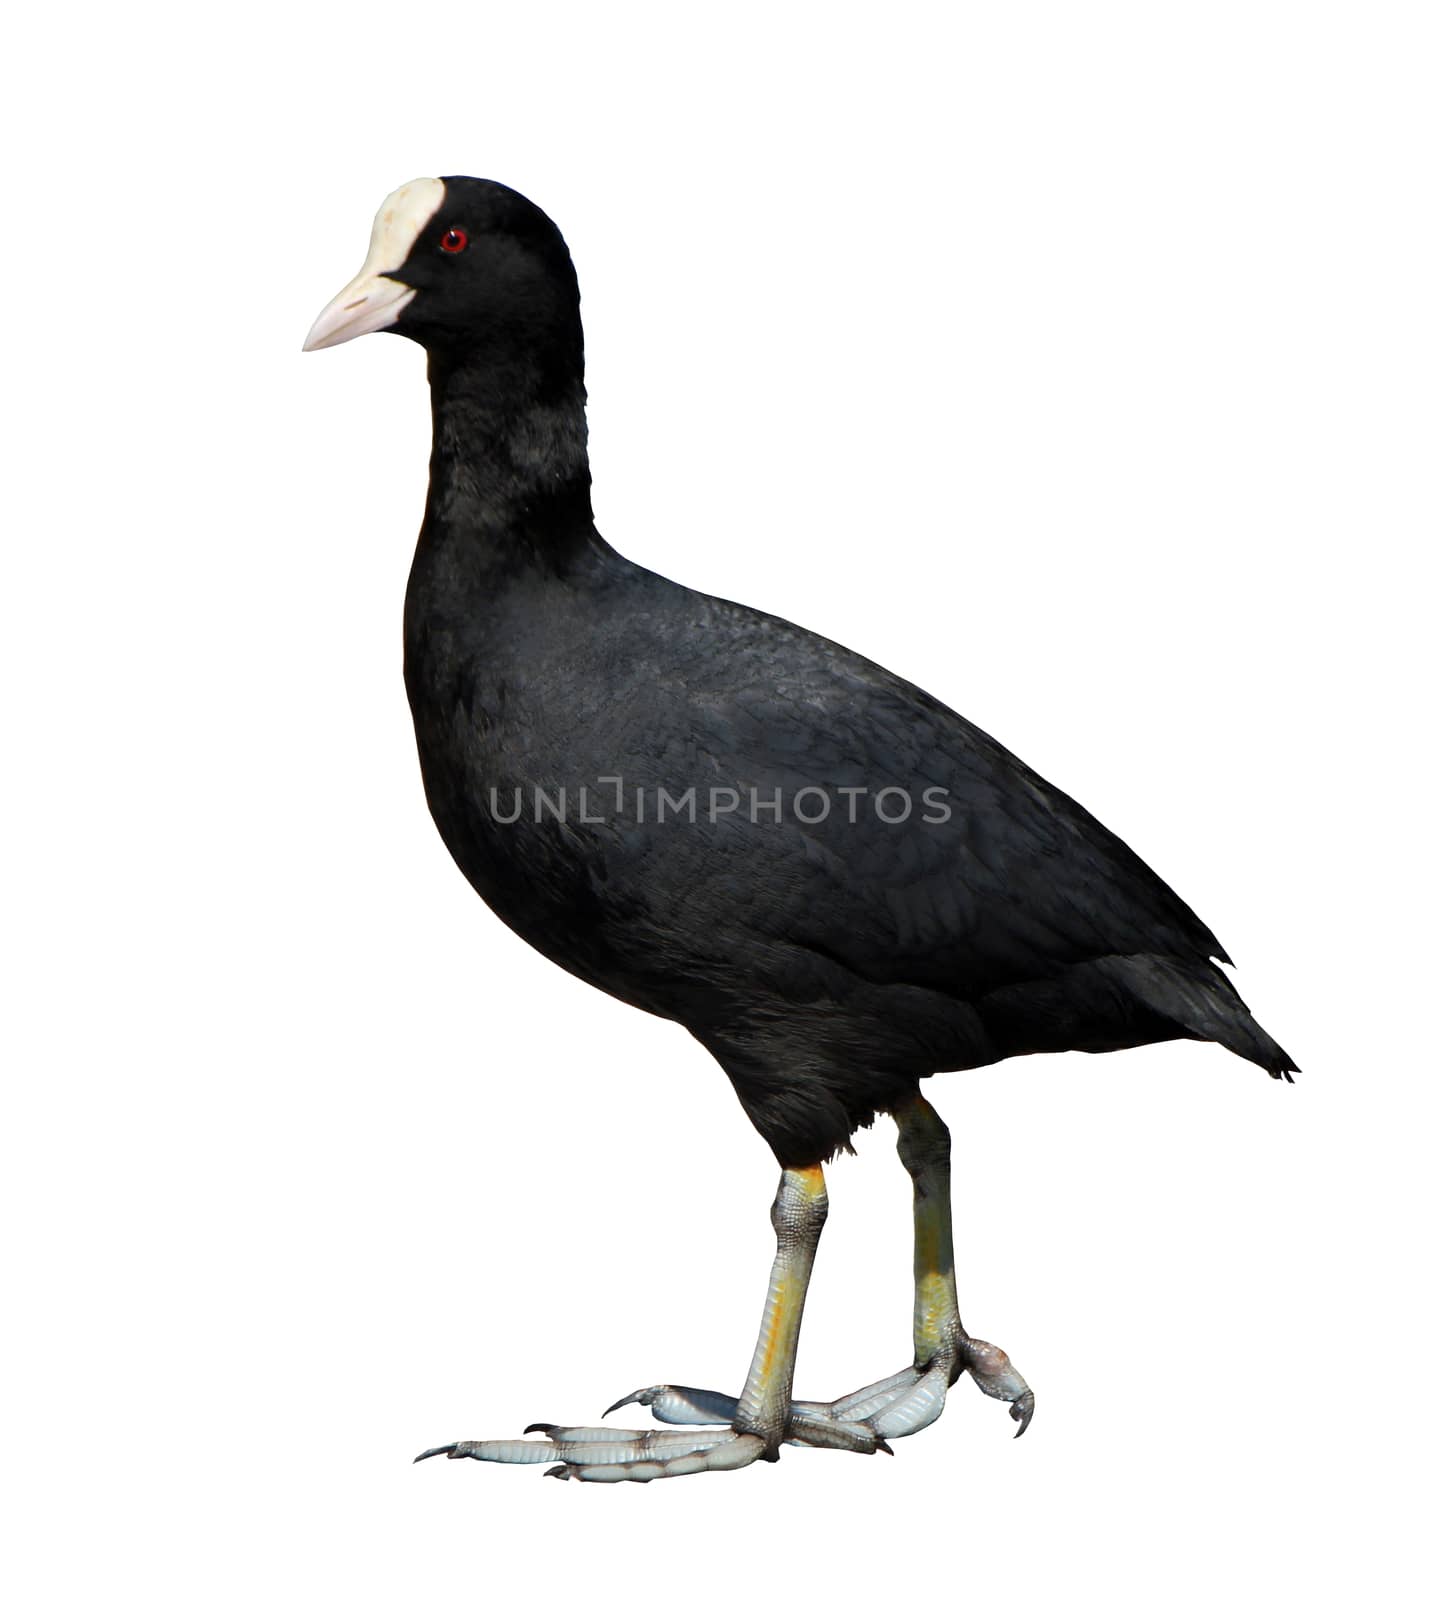 Walking eurasian coot, fulica atra, isolated in white background